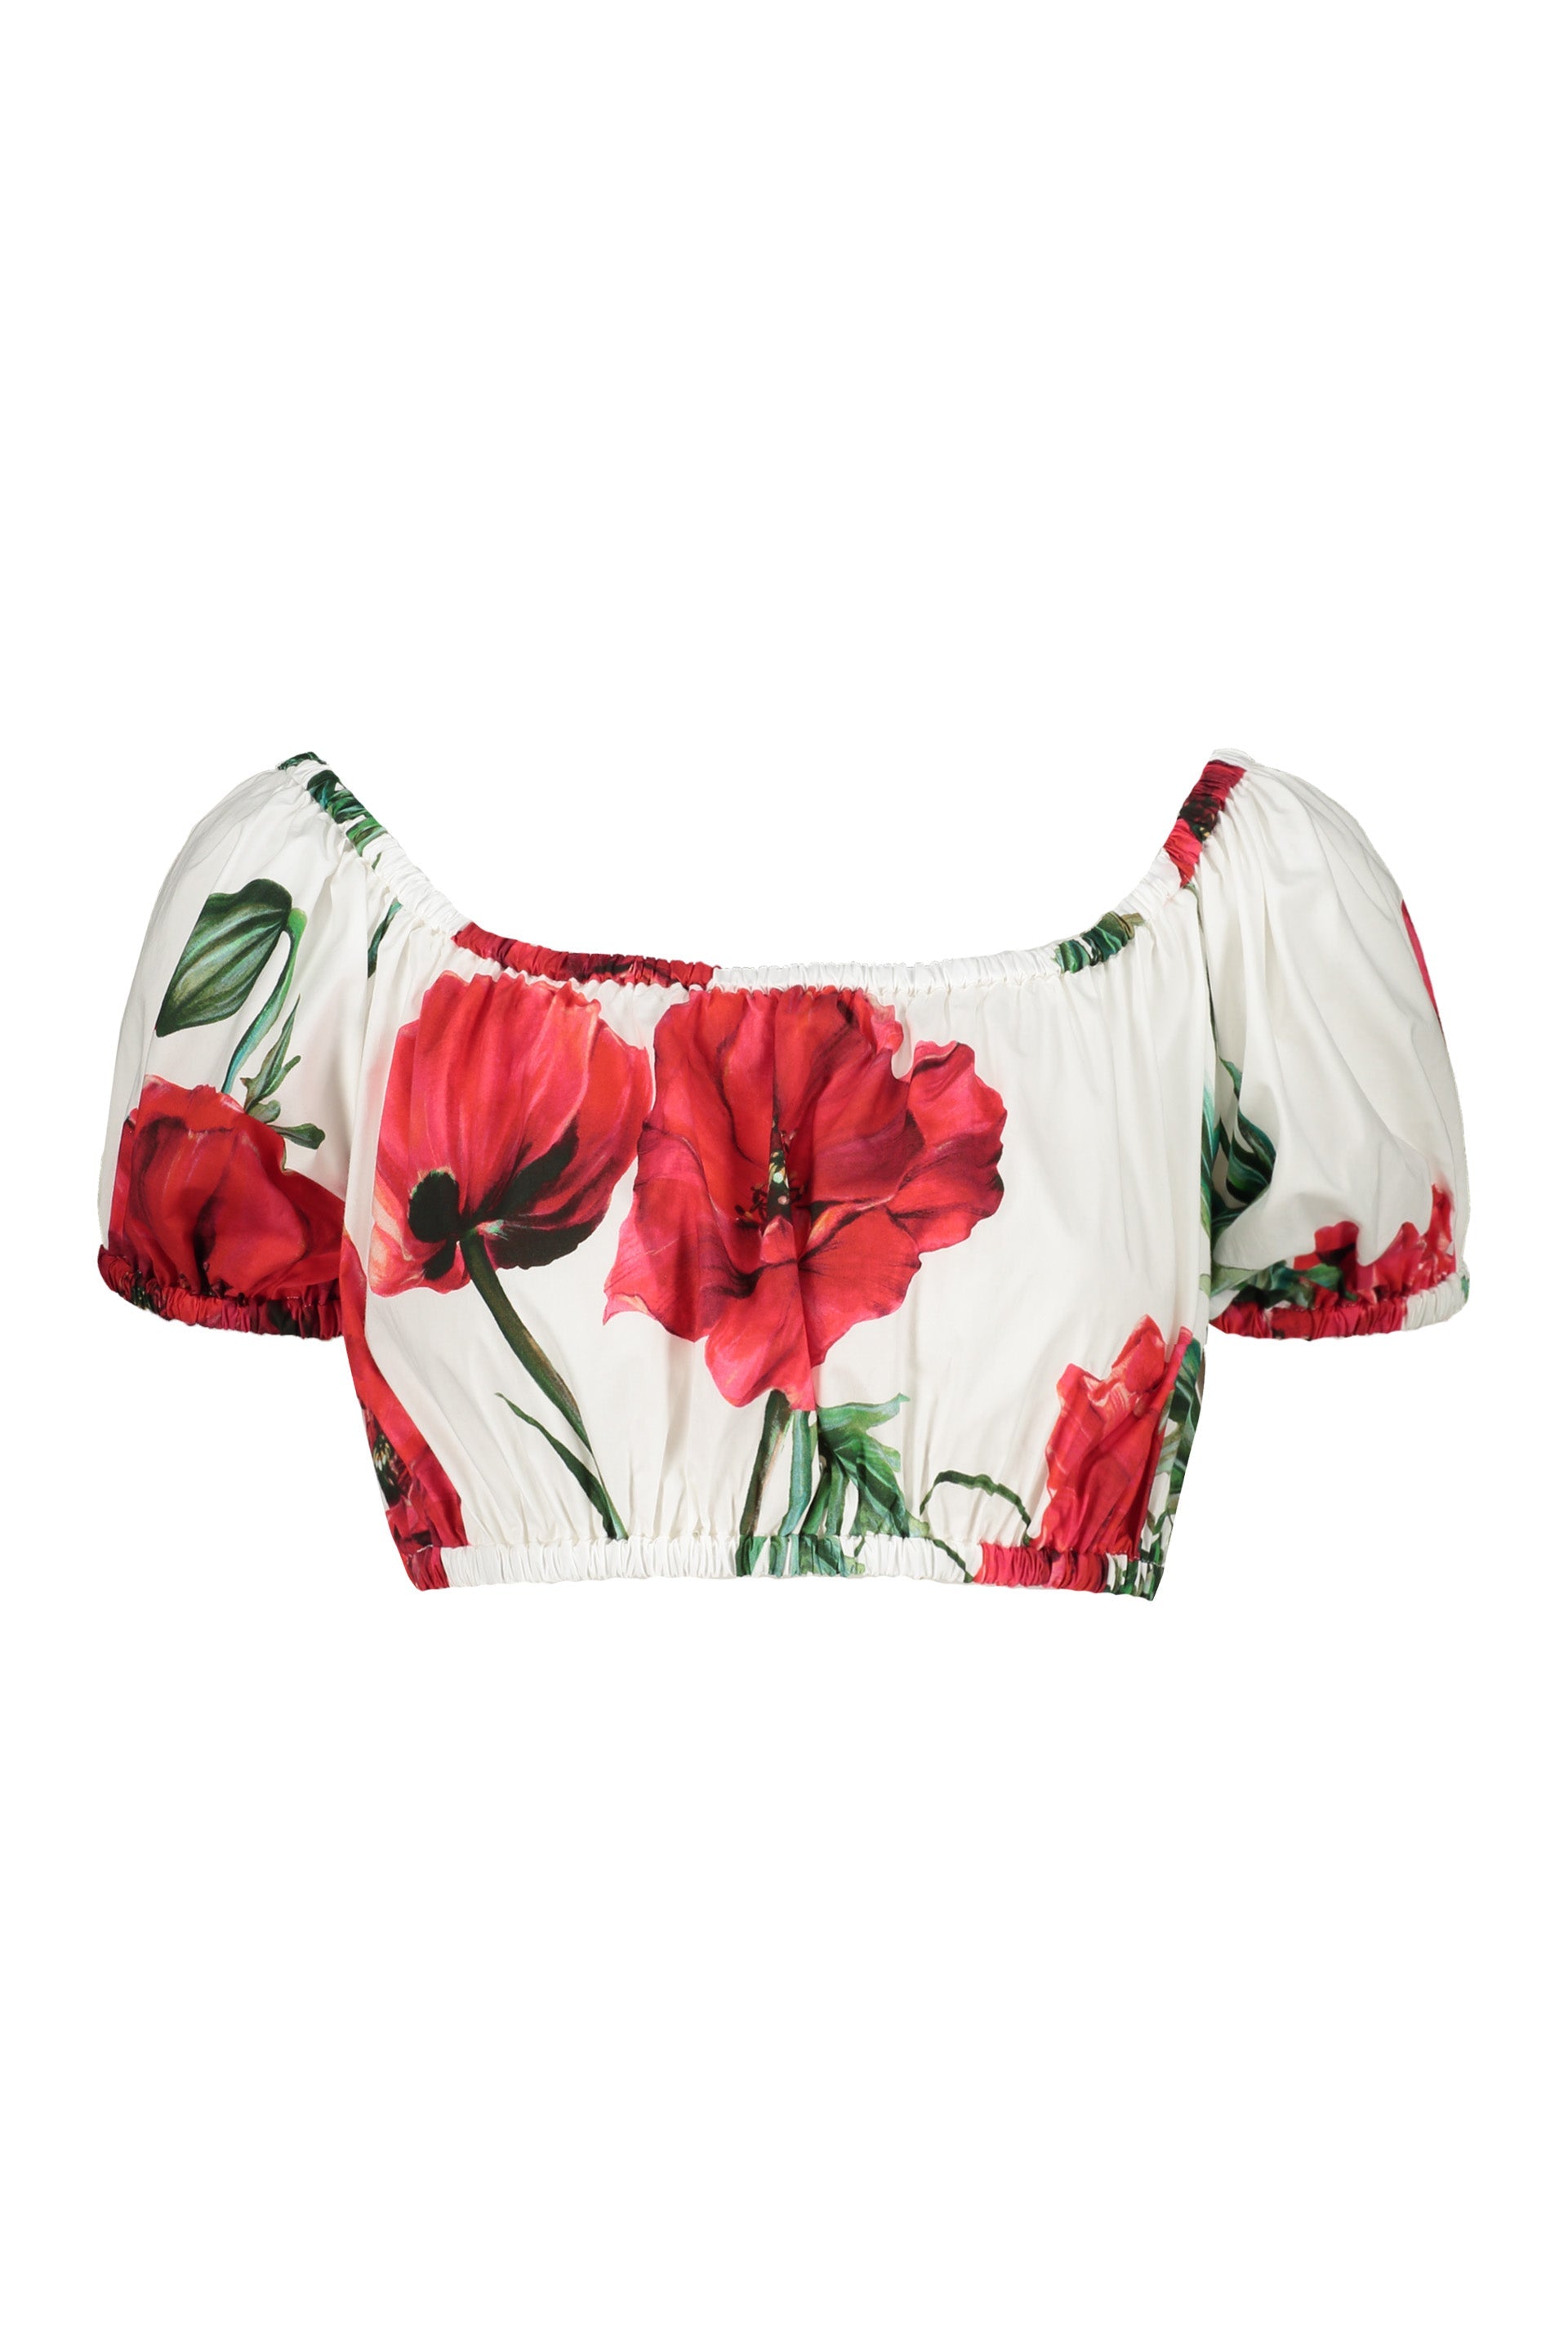 Dolce-Gabbana-OUTLET-SALE-Cotton-crop-top-Shirts-38-ARCHIVE-COLLECTION.jpg